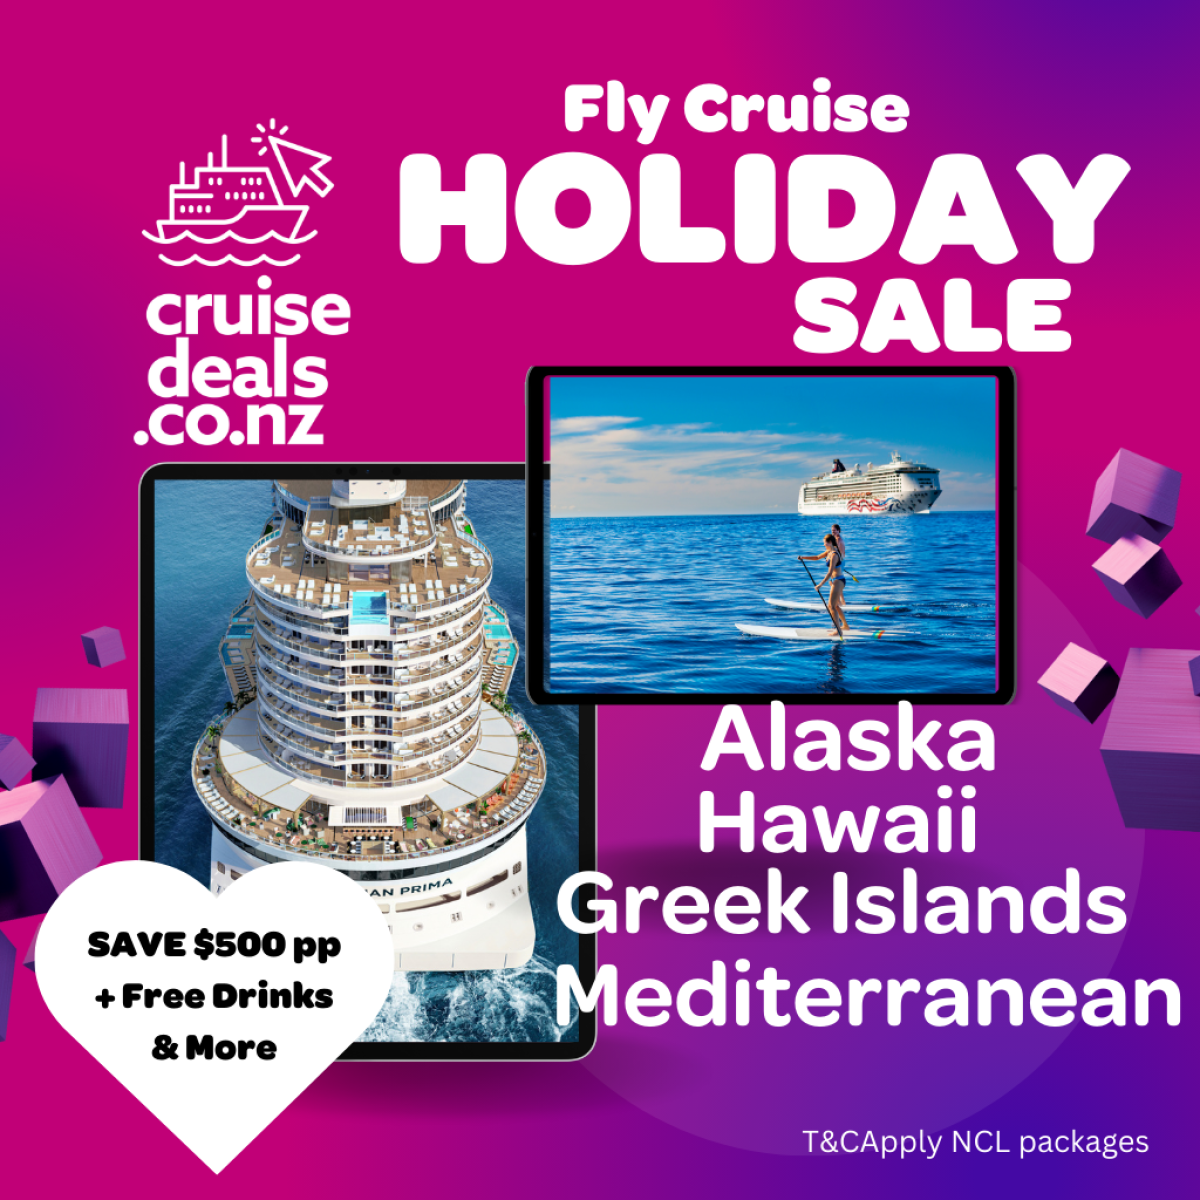 Save up to $500 pp in our NCL Flash Cruise Holiday Sale'